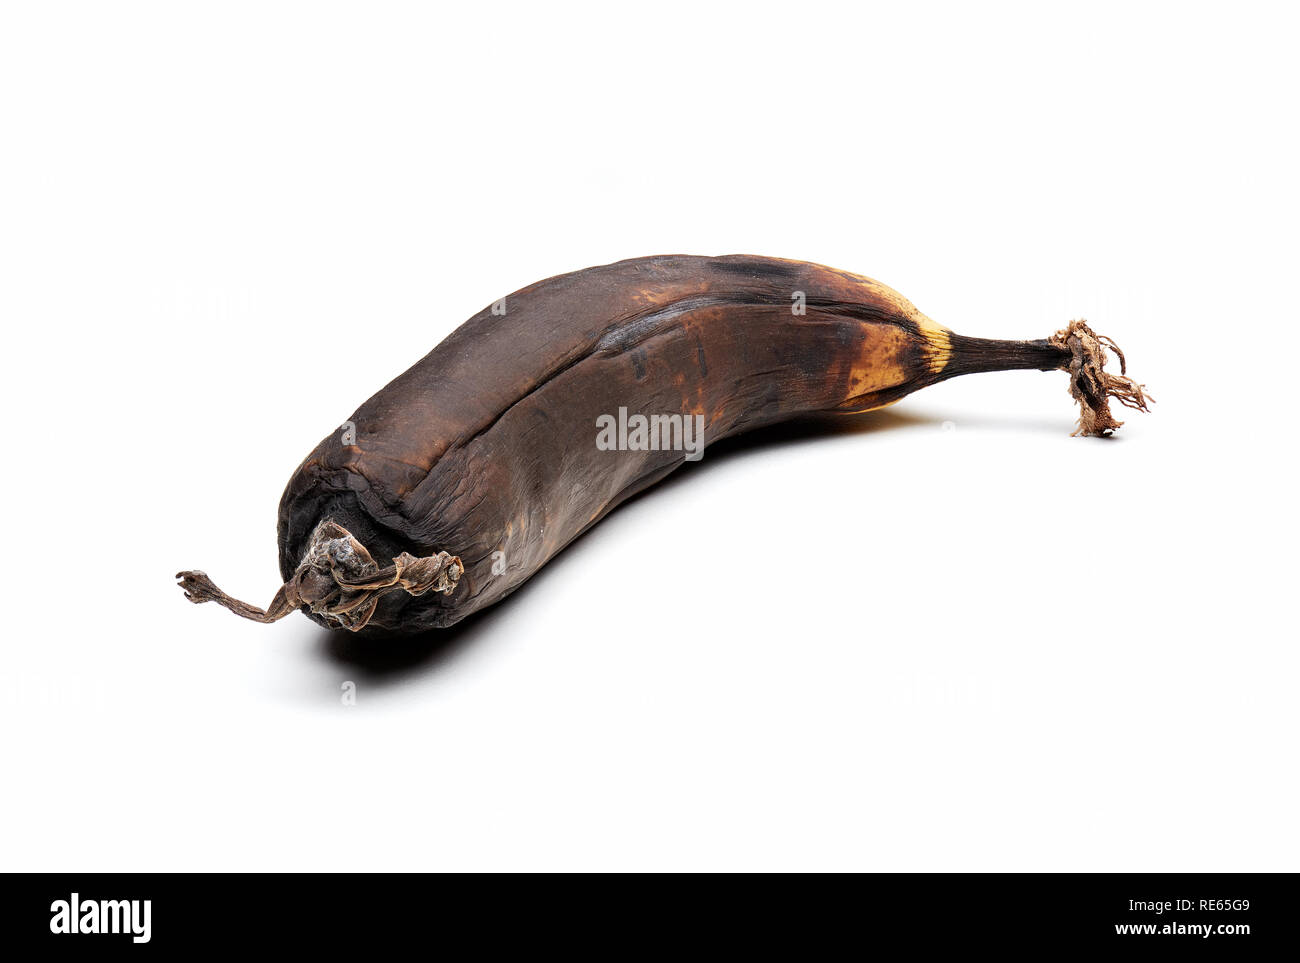 A single over ripened and spoiled banana isolated on white. Stock Photo